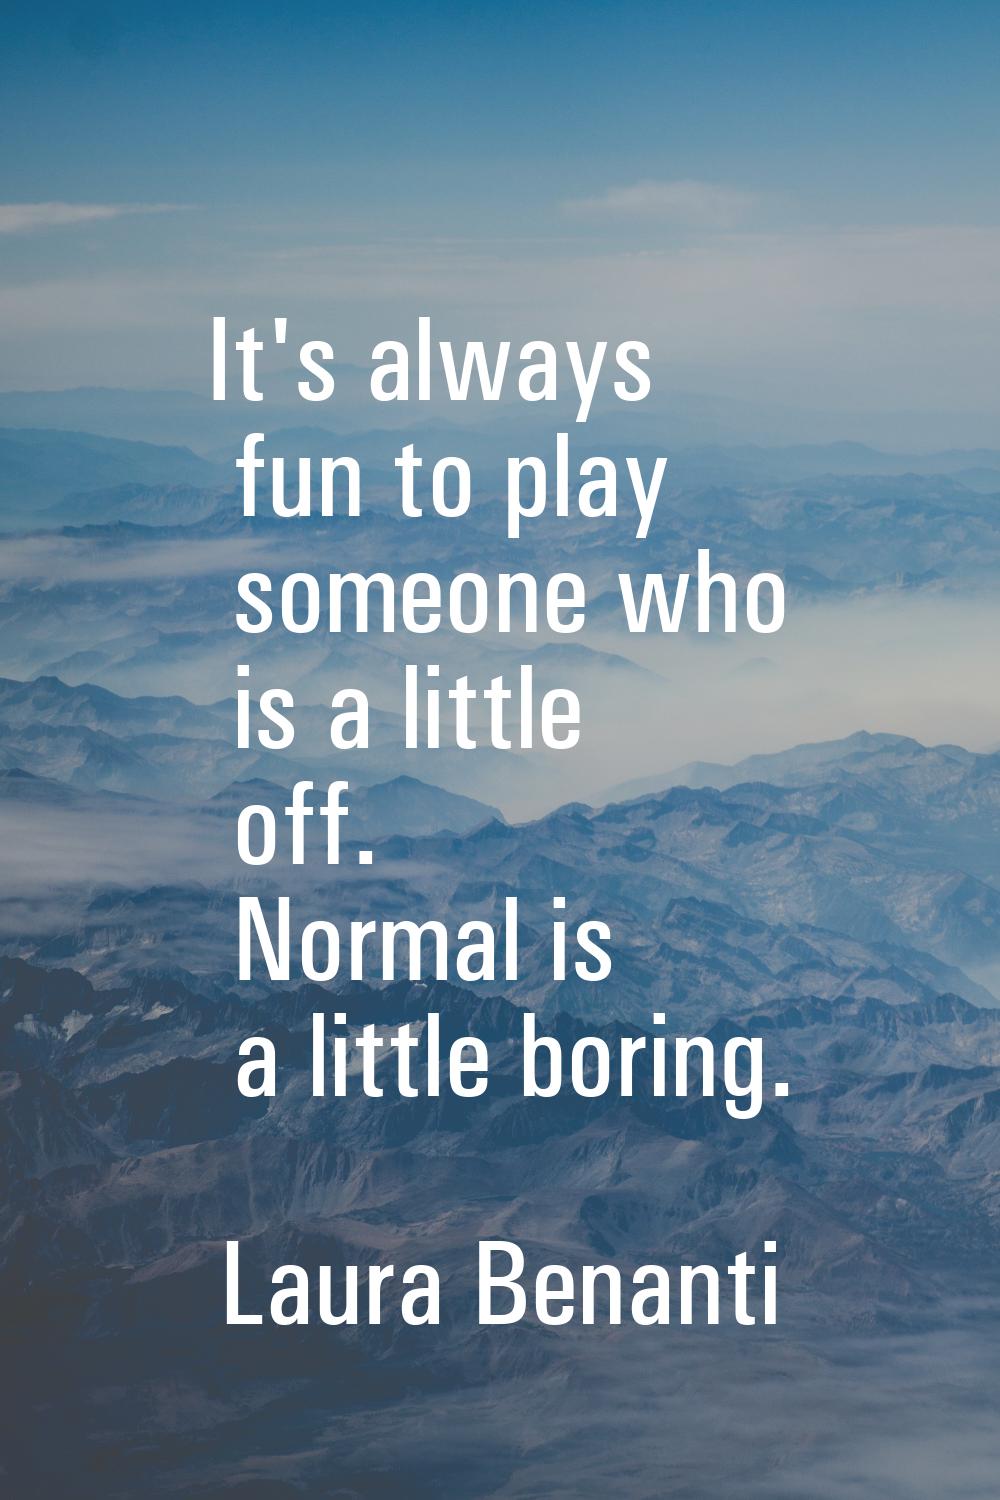 It's always fun to play someone who is a little off. Normal is a little boring.